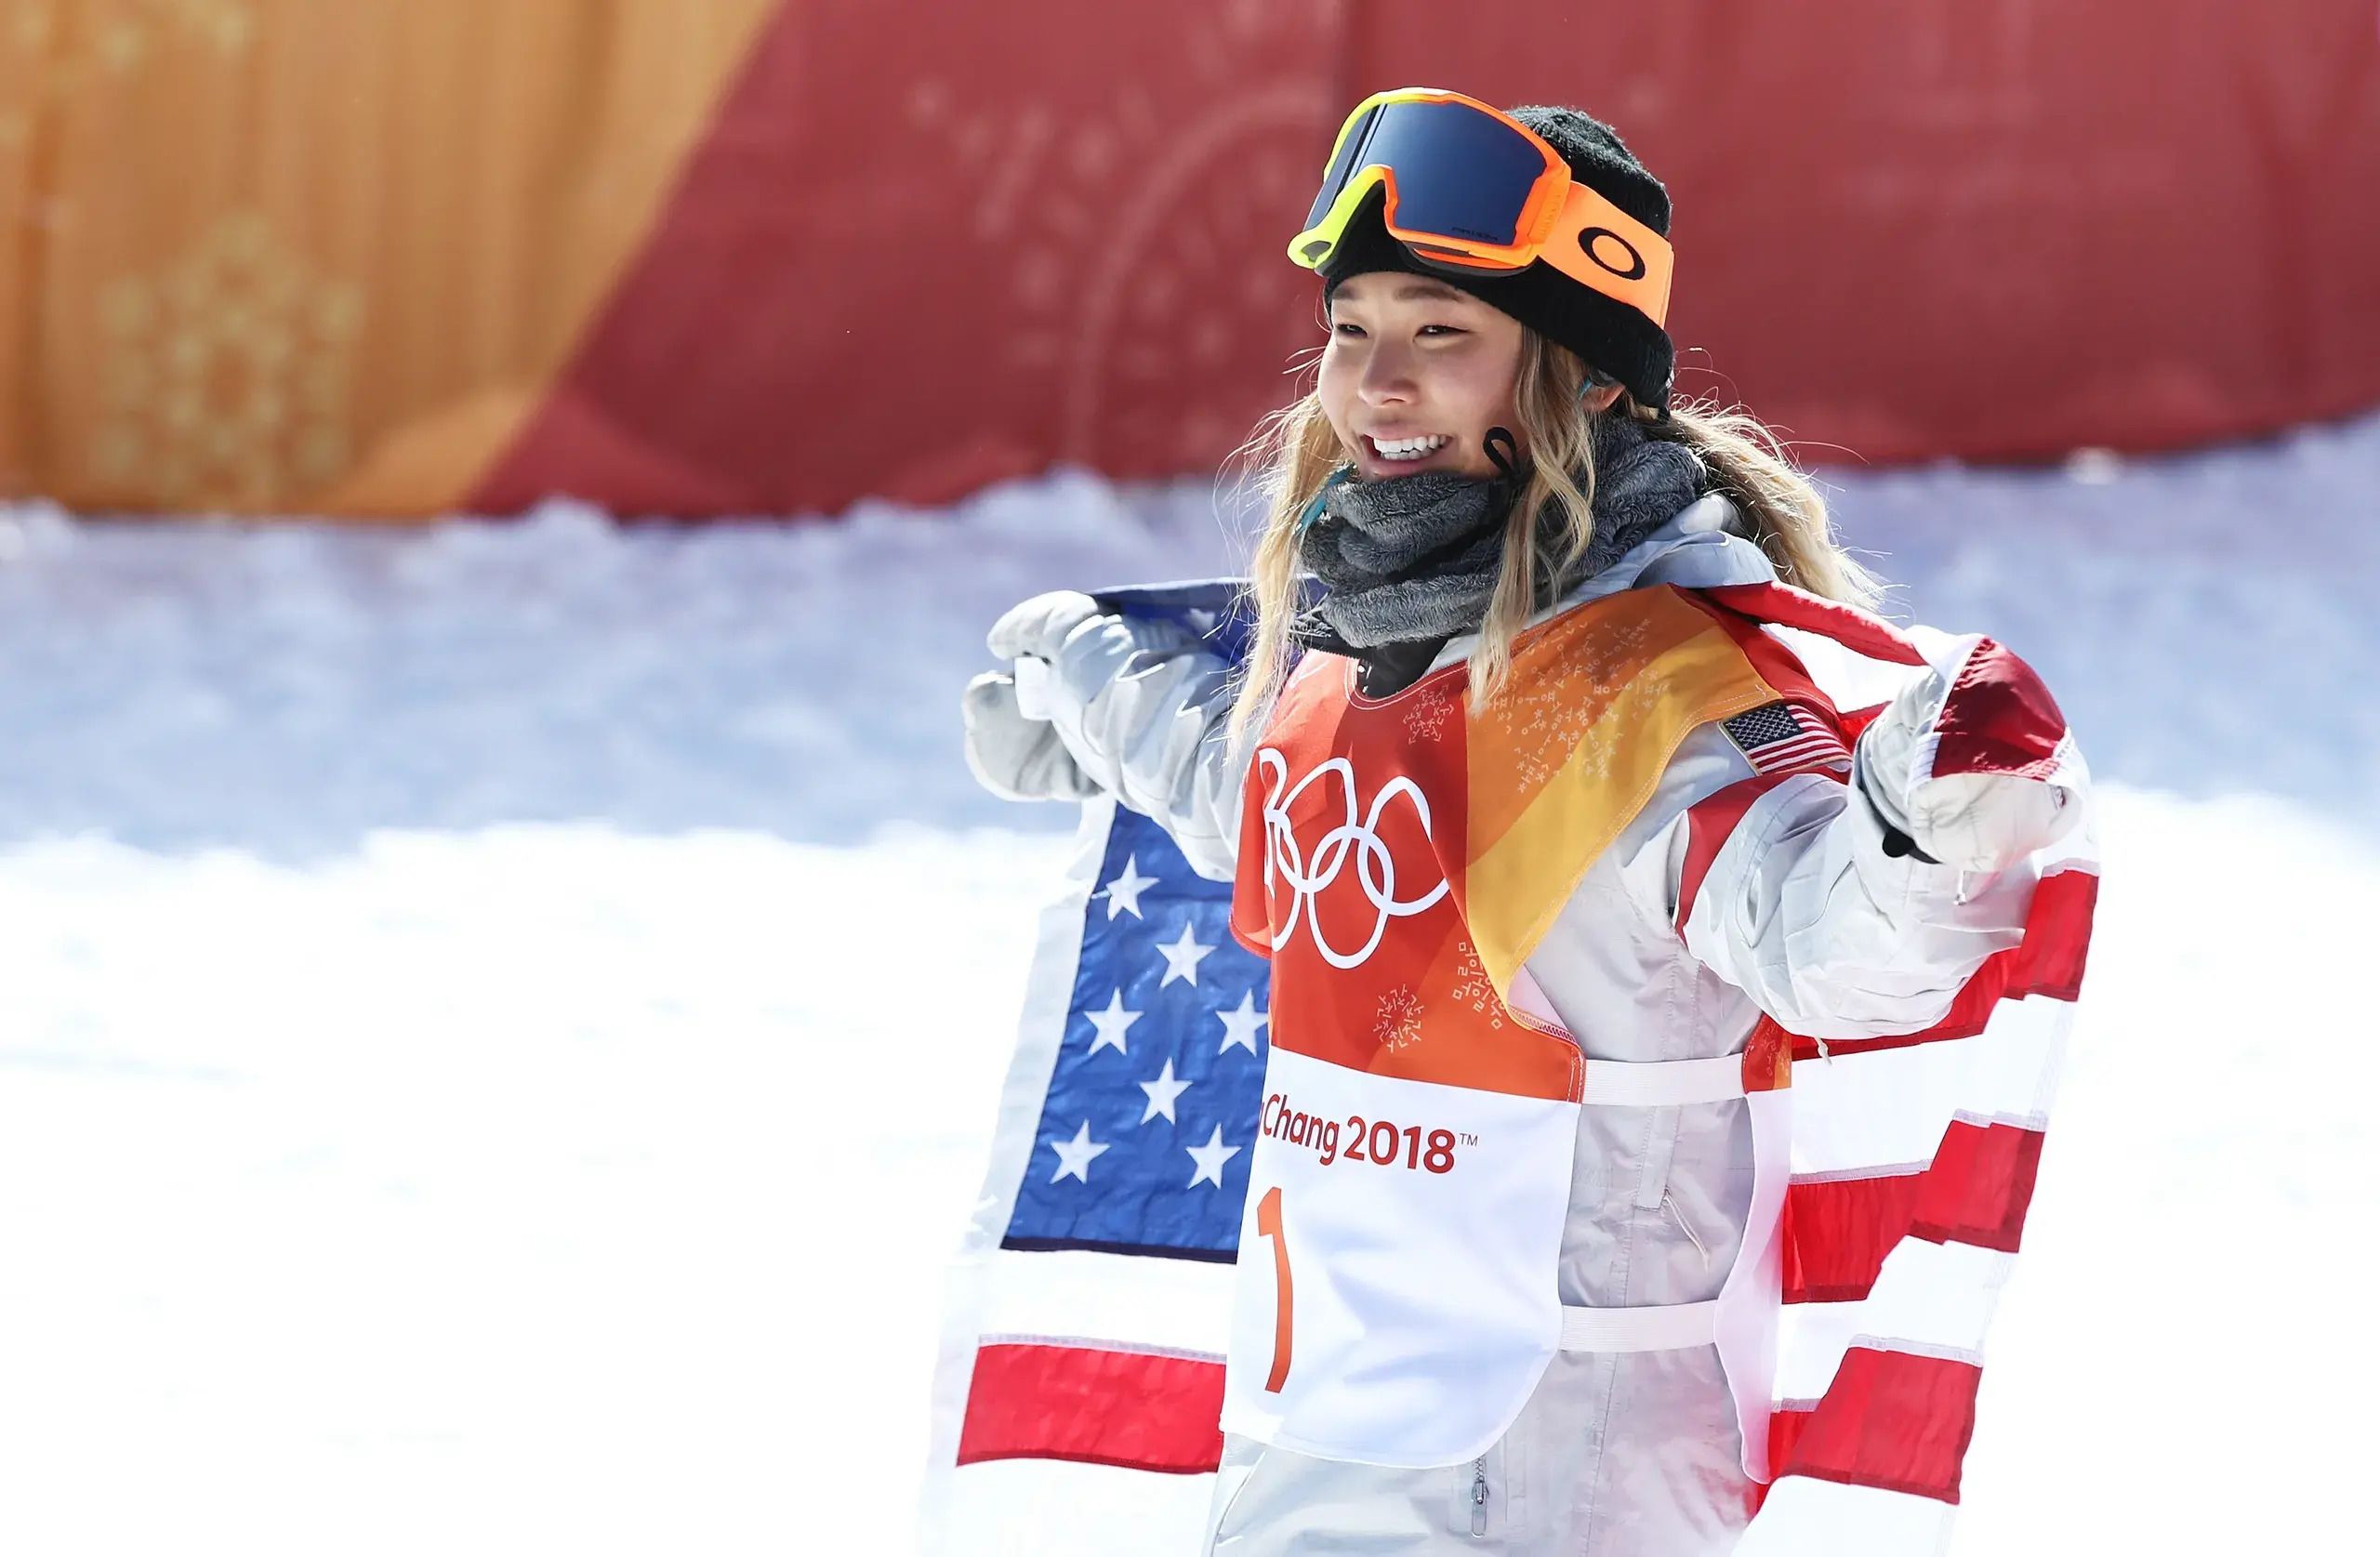 Champion snowboarder Chloe Kim to not participate this season for improving mental health 